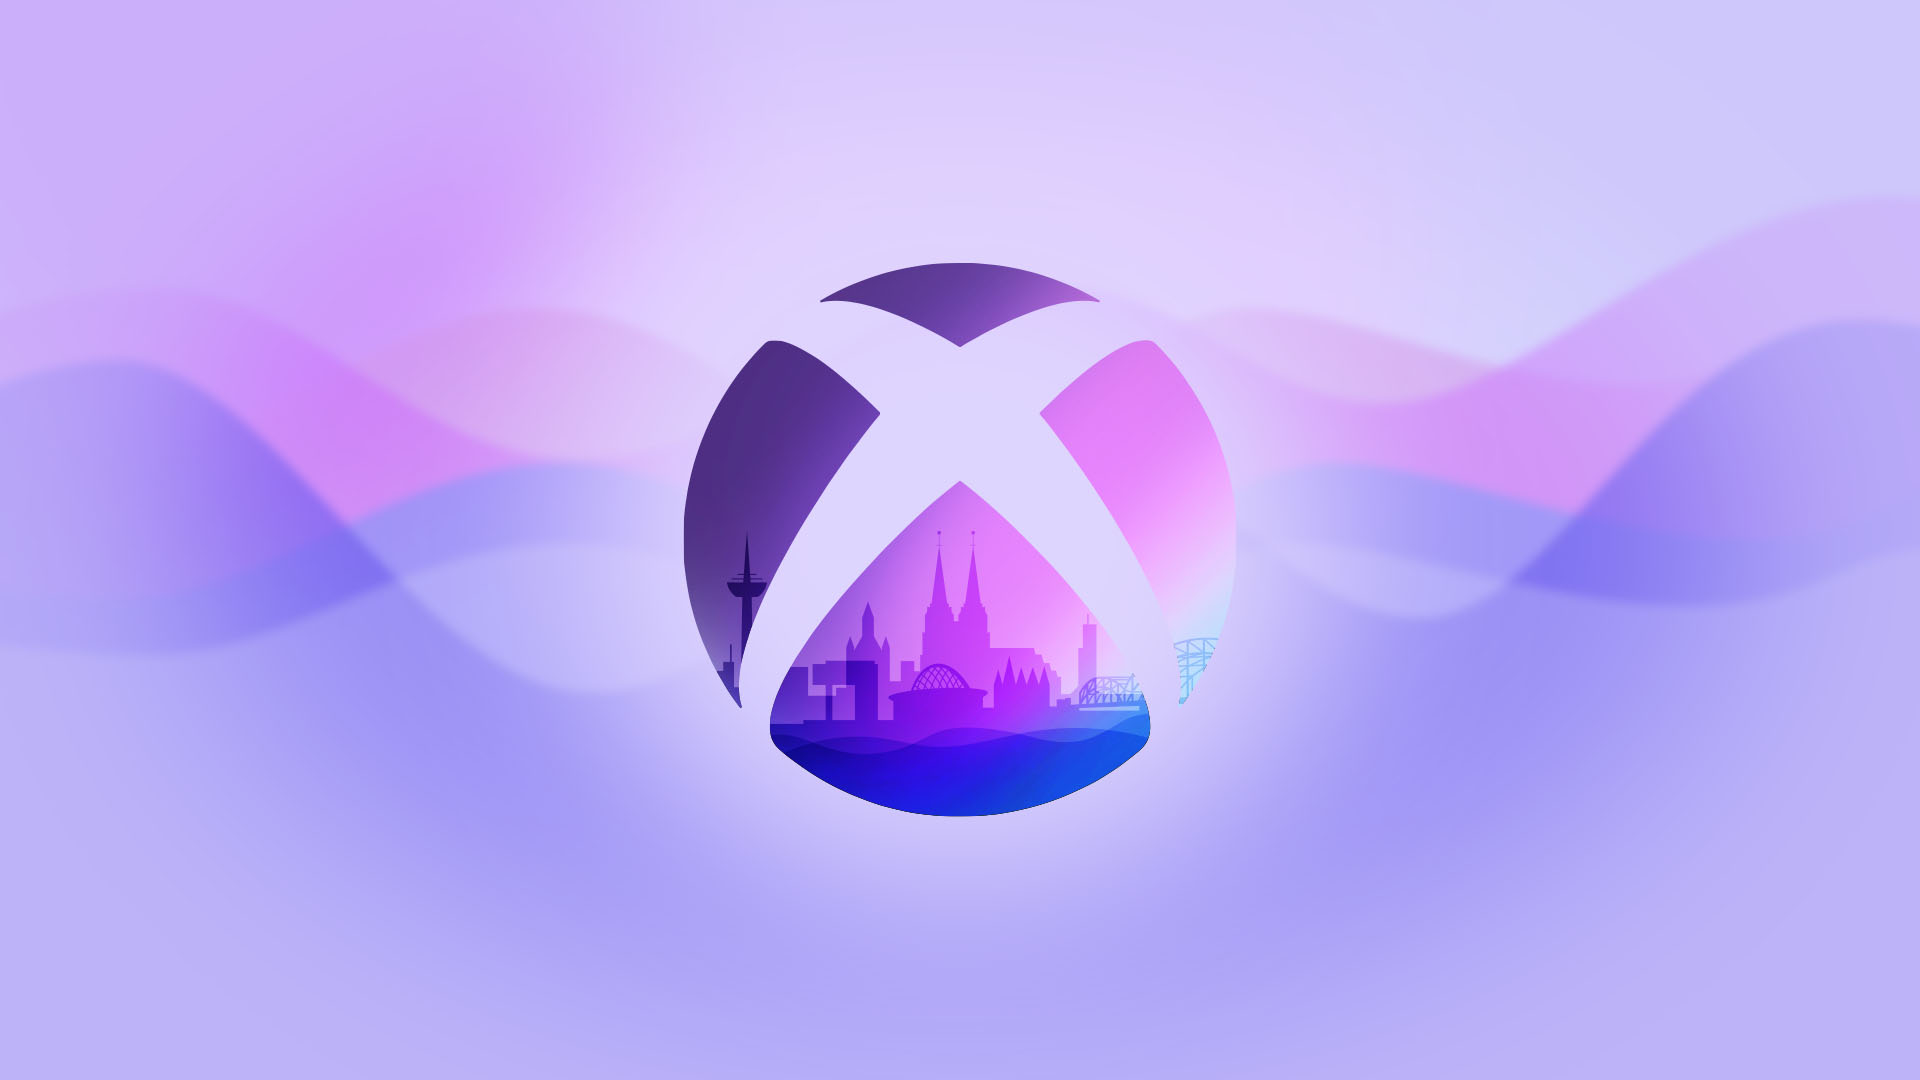 Xbox is bringing a host of titles with their Gamescom 2022 lineup